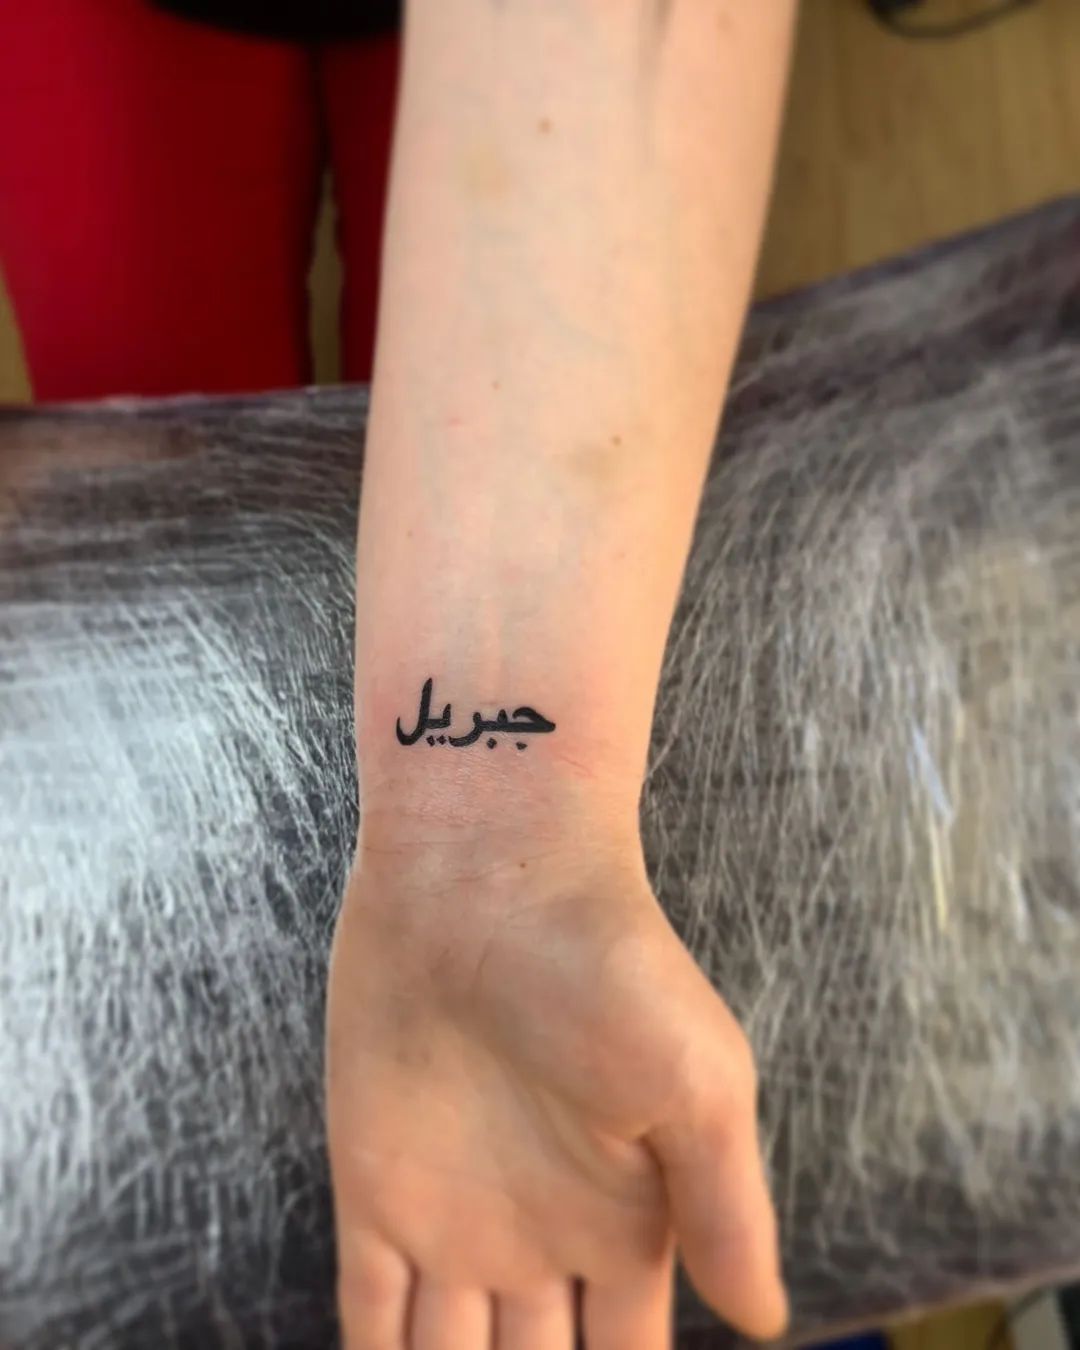 Hand tattoos are always a popular choice. Go for a small and chic Arabic lettering tattoo to look nice.